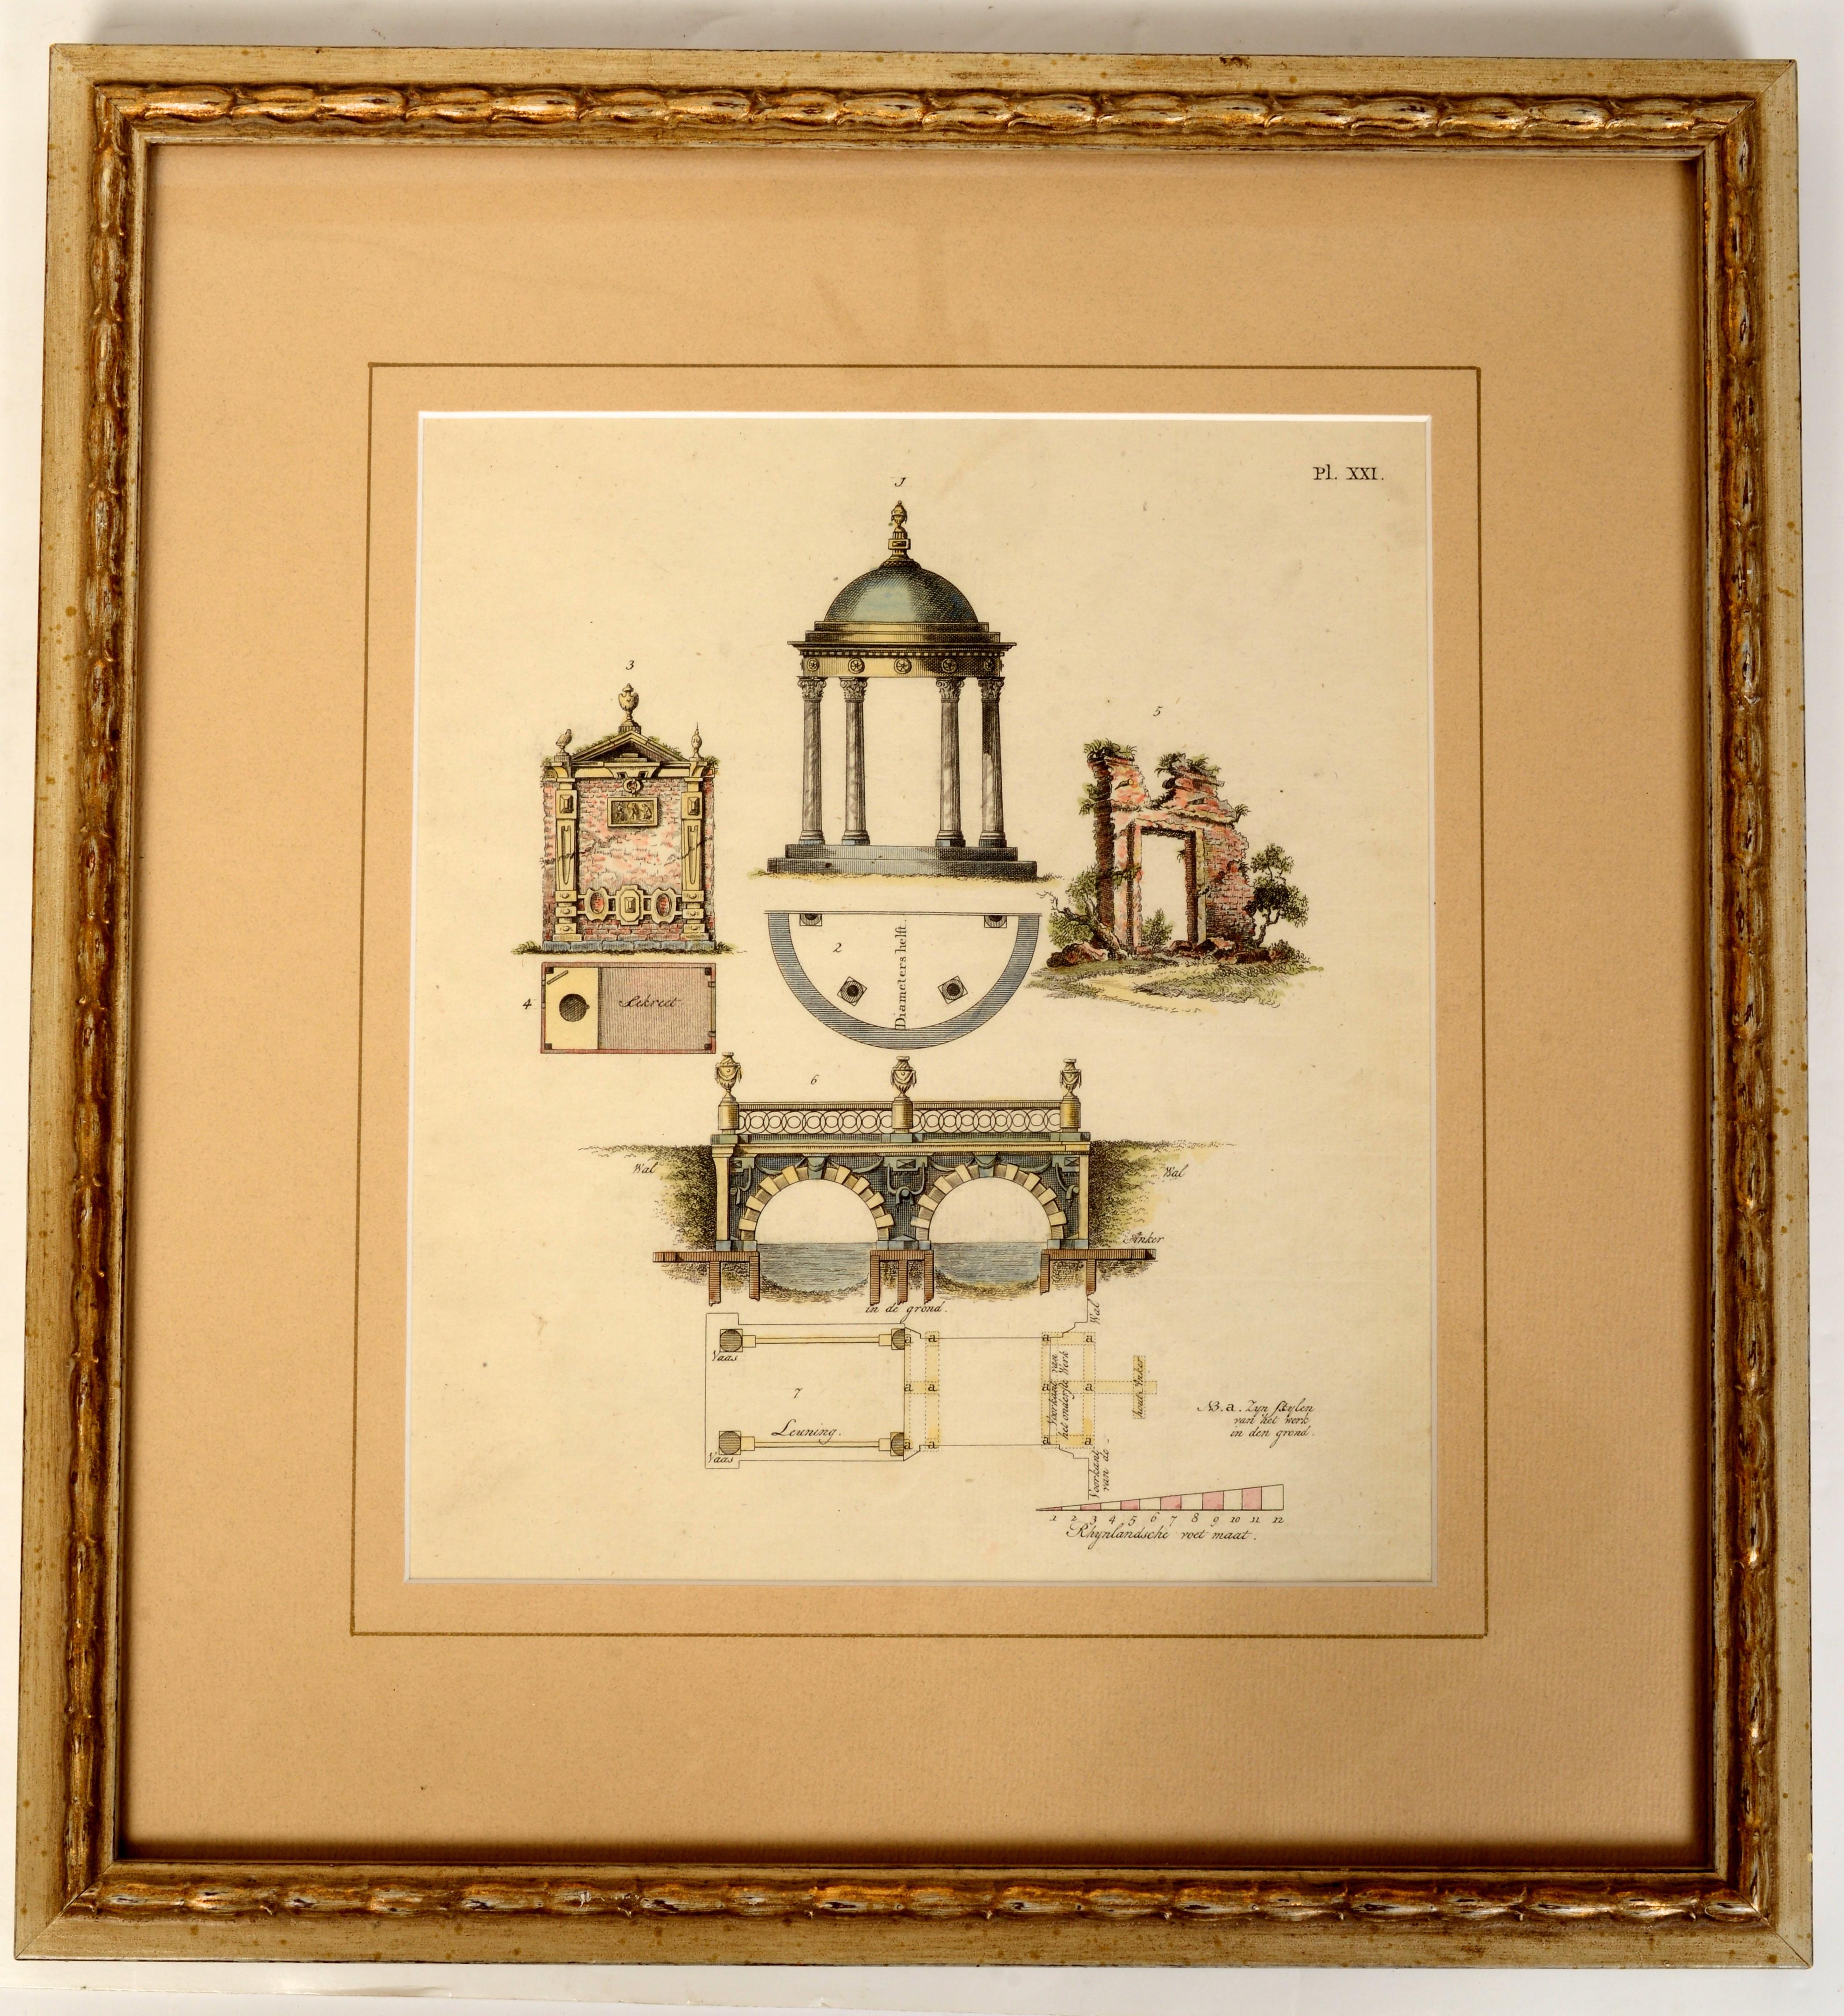 Four Hand Colored Antique Engravings of Garden Architecture by Van Laar, c1802 For Sale 8